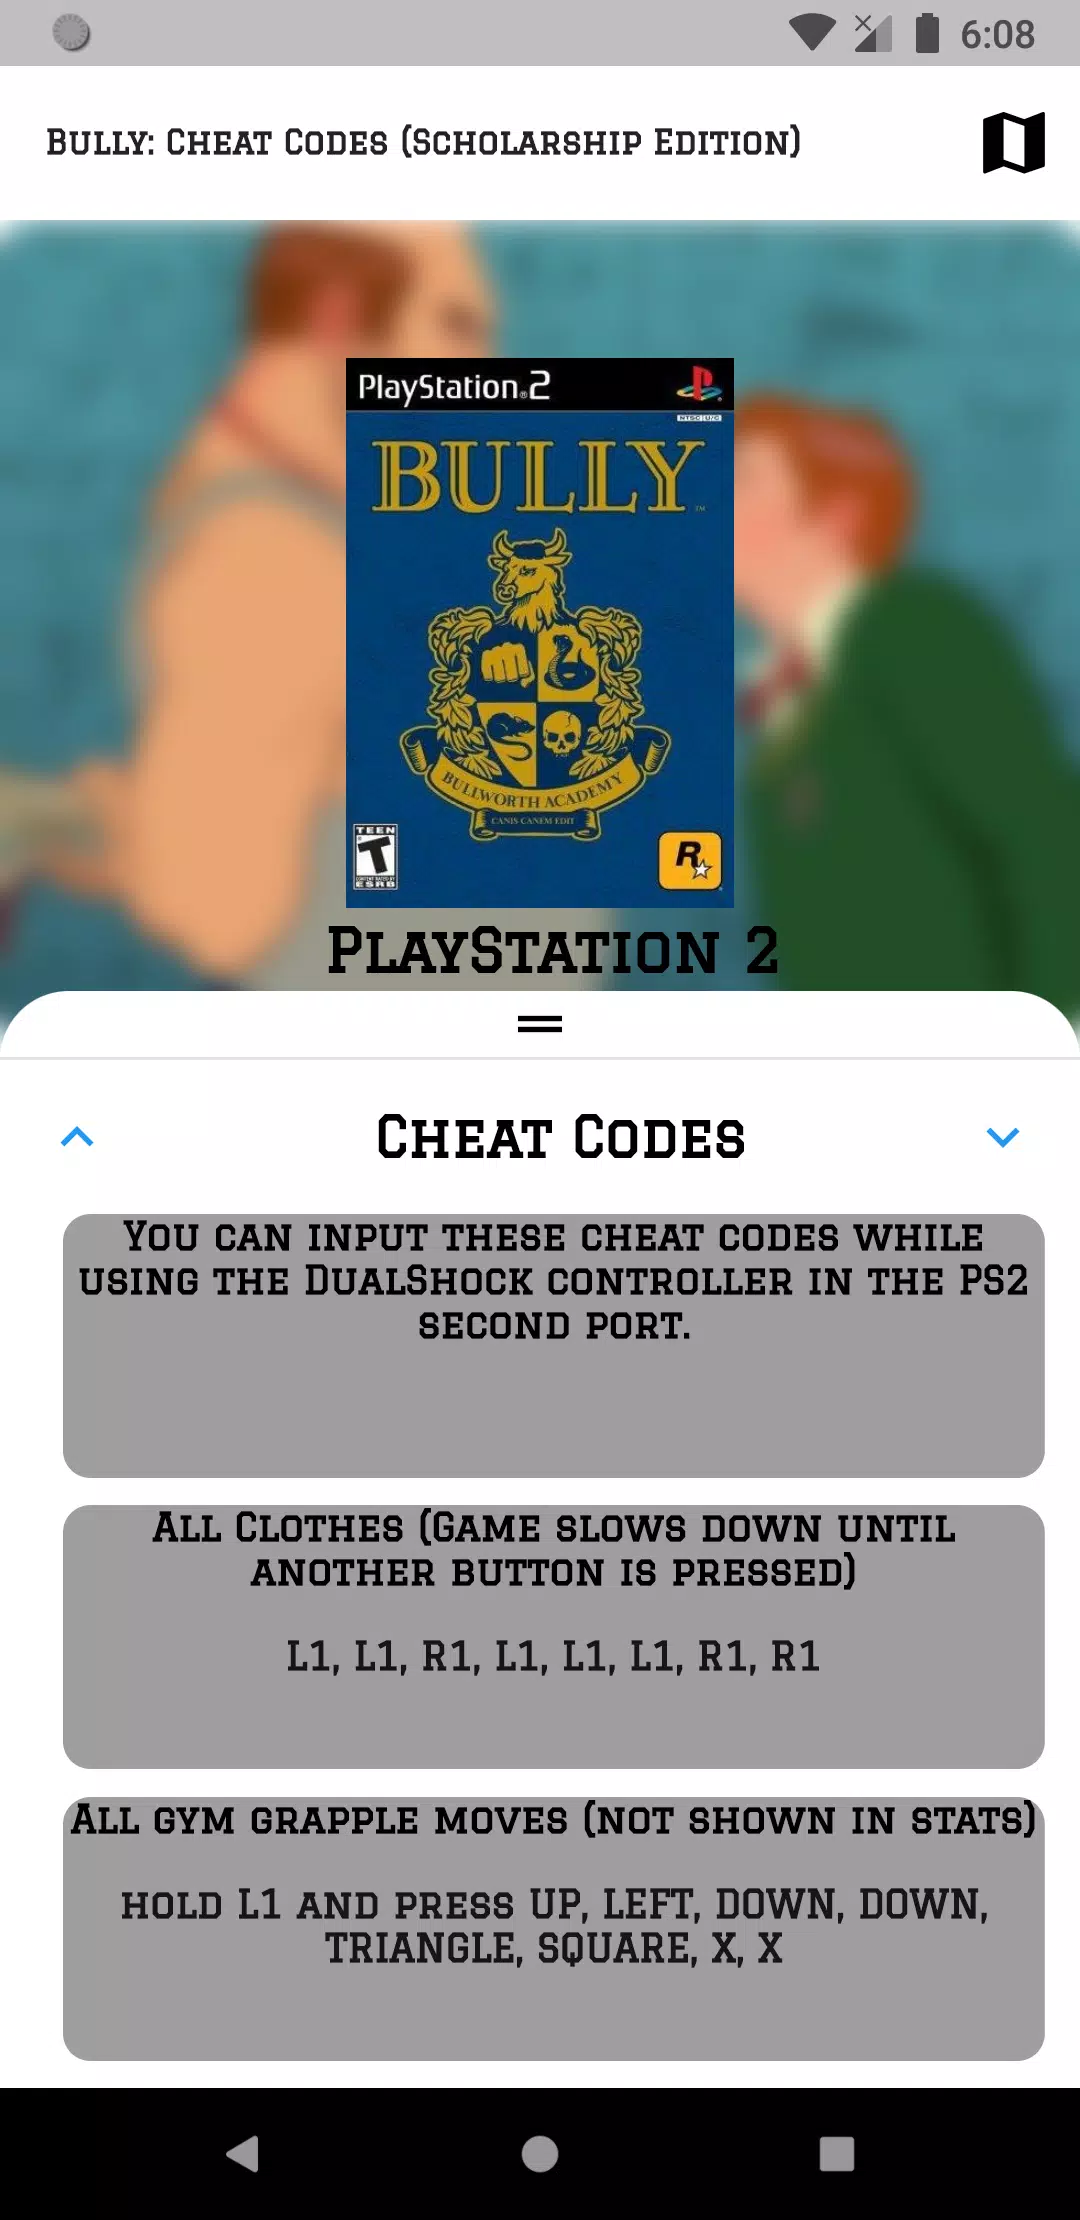 Bully: Cheat Codes - Scholarship Edition APK for Android Download